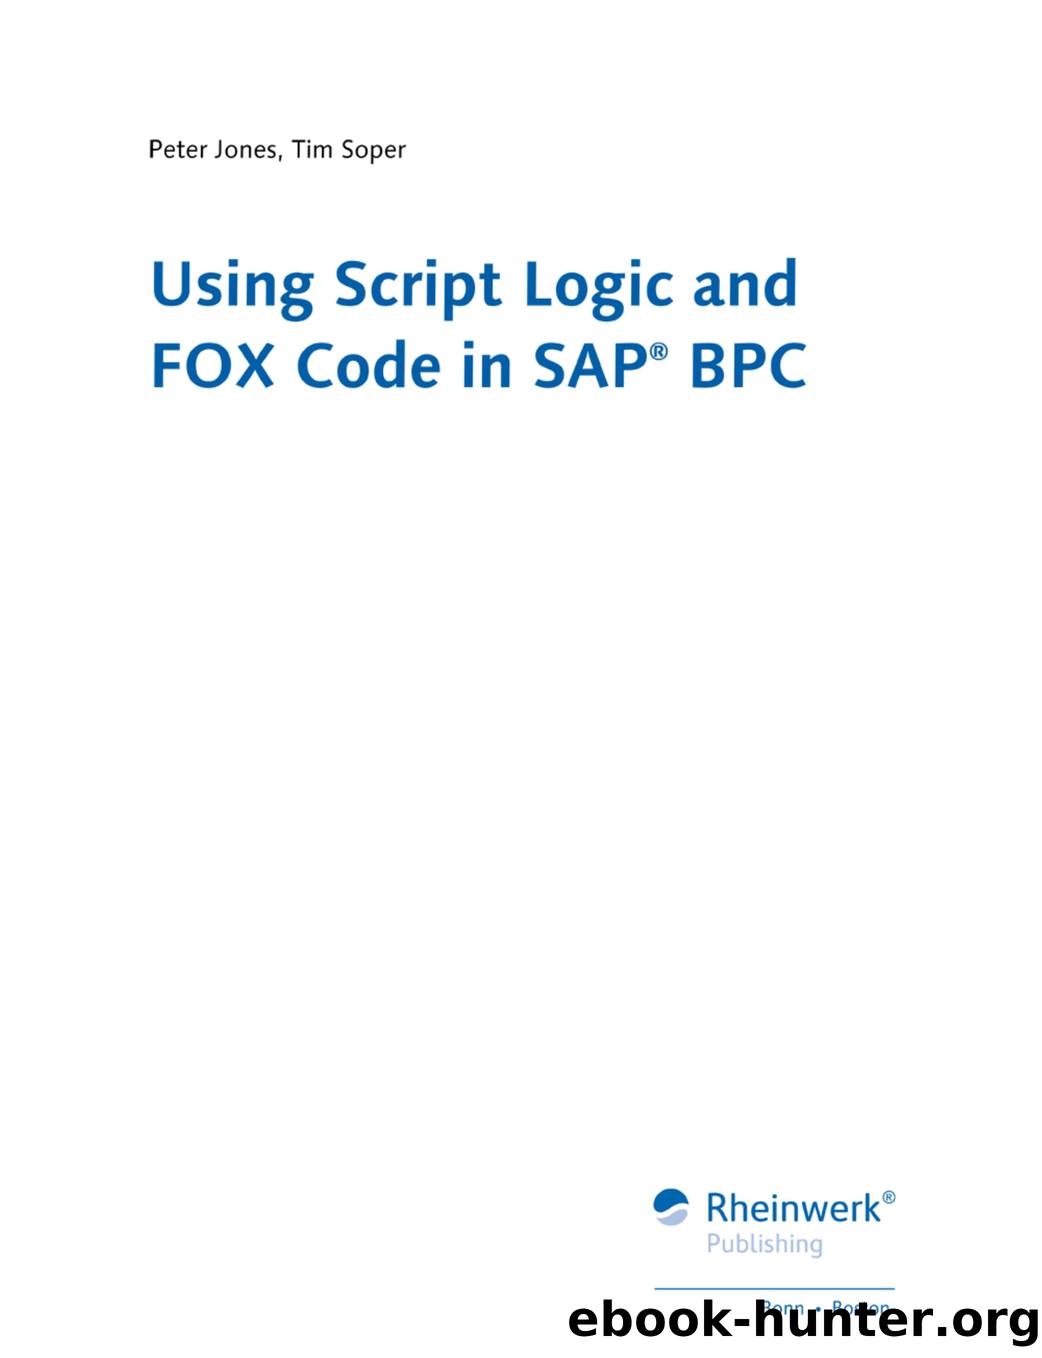 Using Script Logic and FOX Code in SAP BPC by Unknown